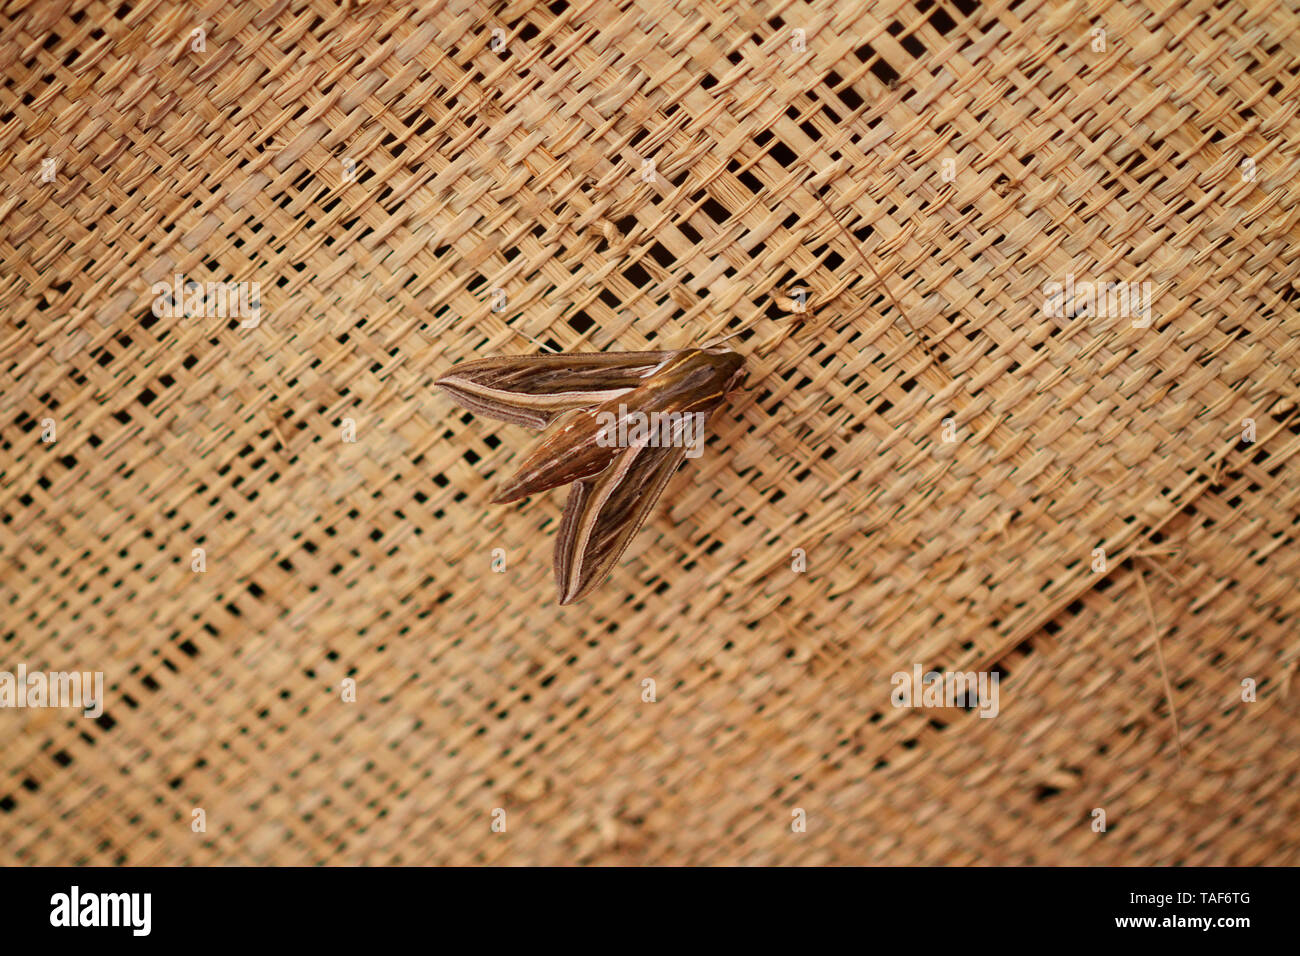 Silver-striped hawk-moth (Hippotion celerio) on a basketry, Madagascar Stock Photo